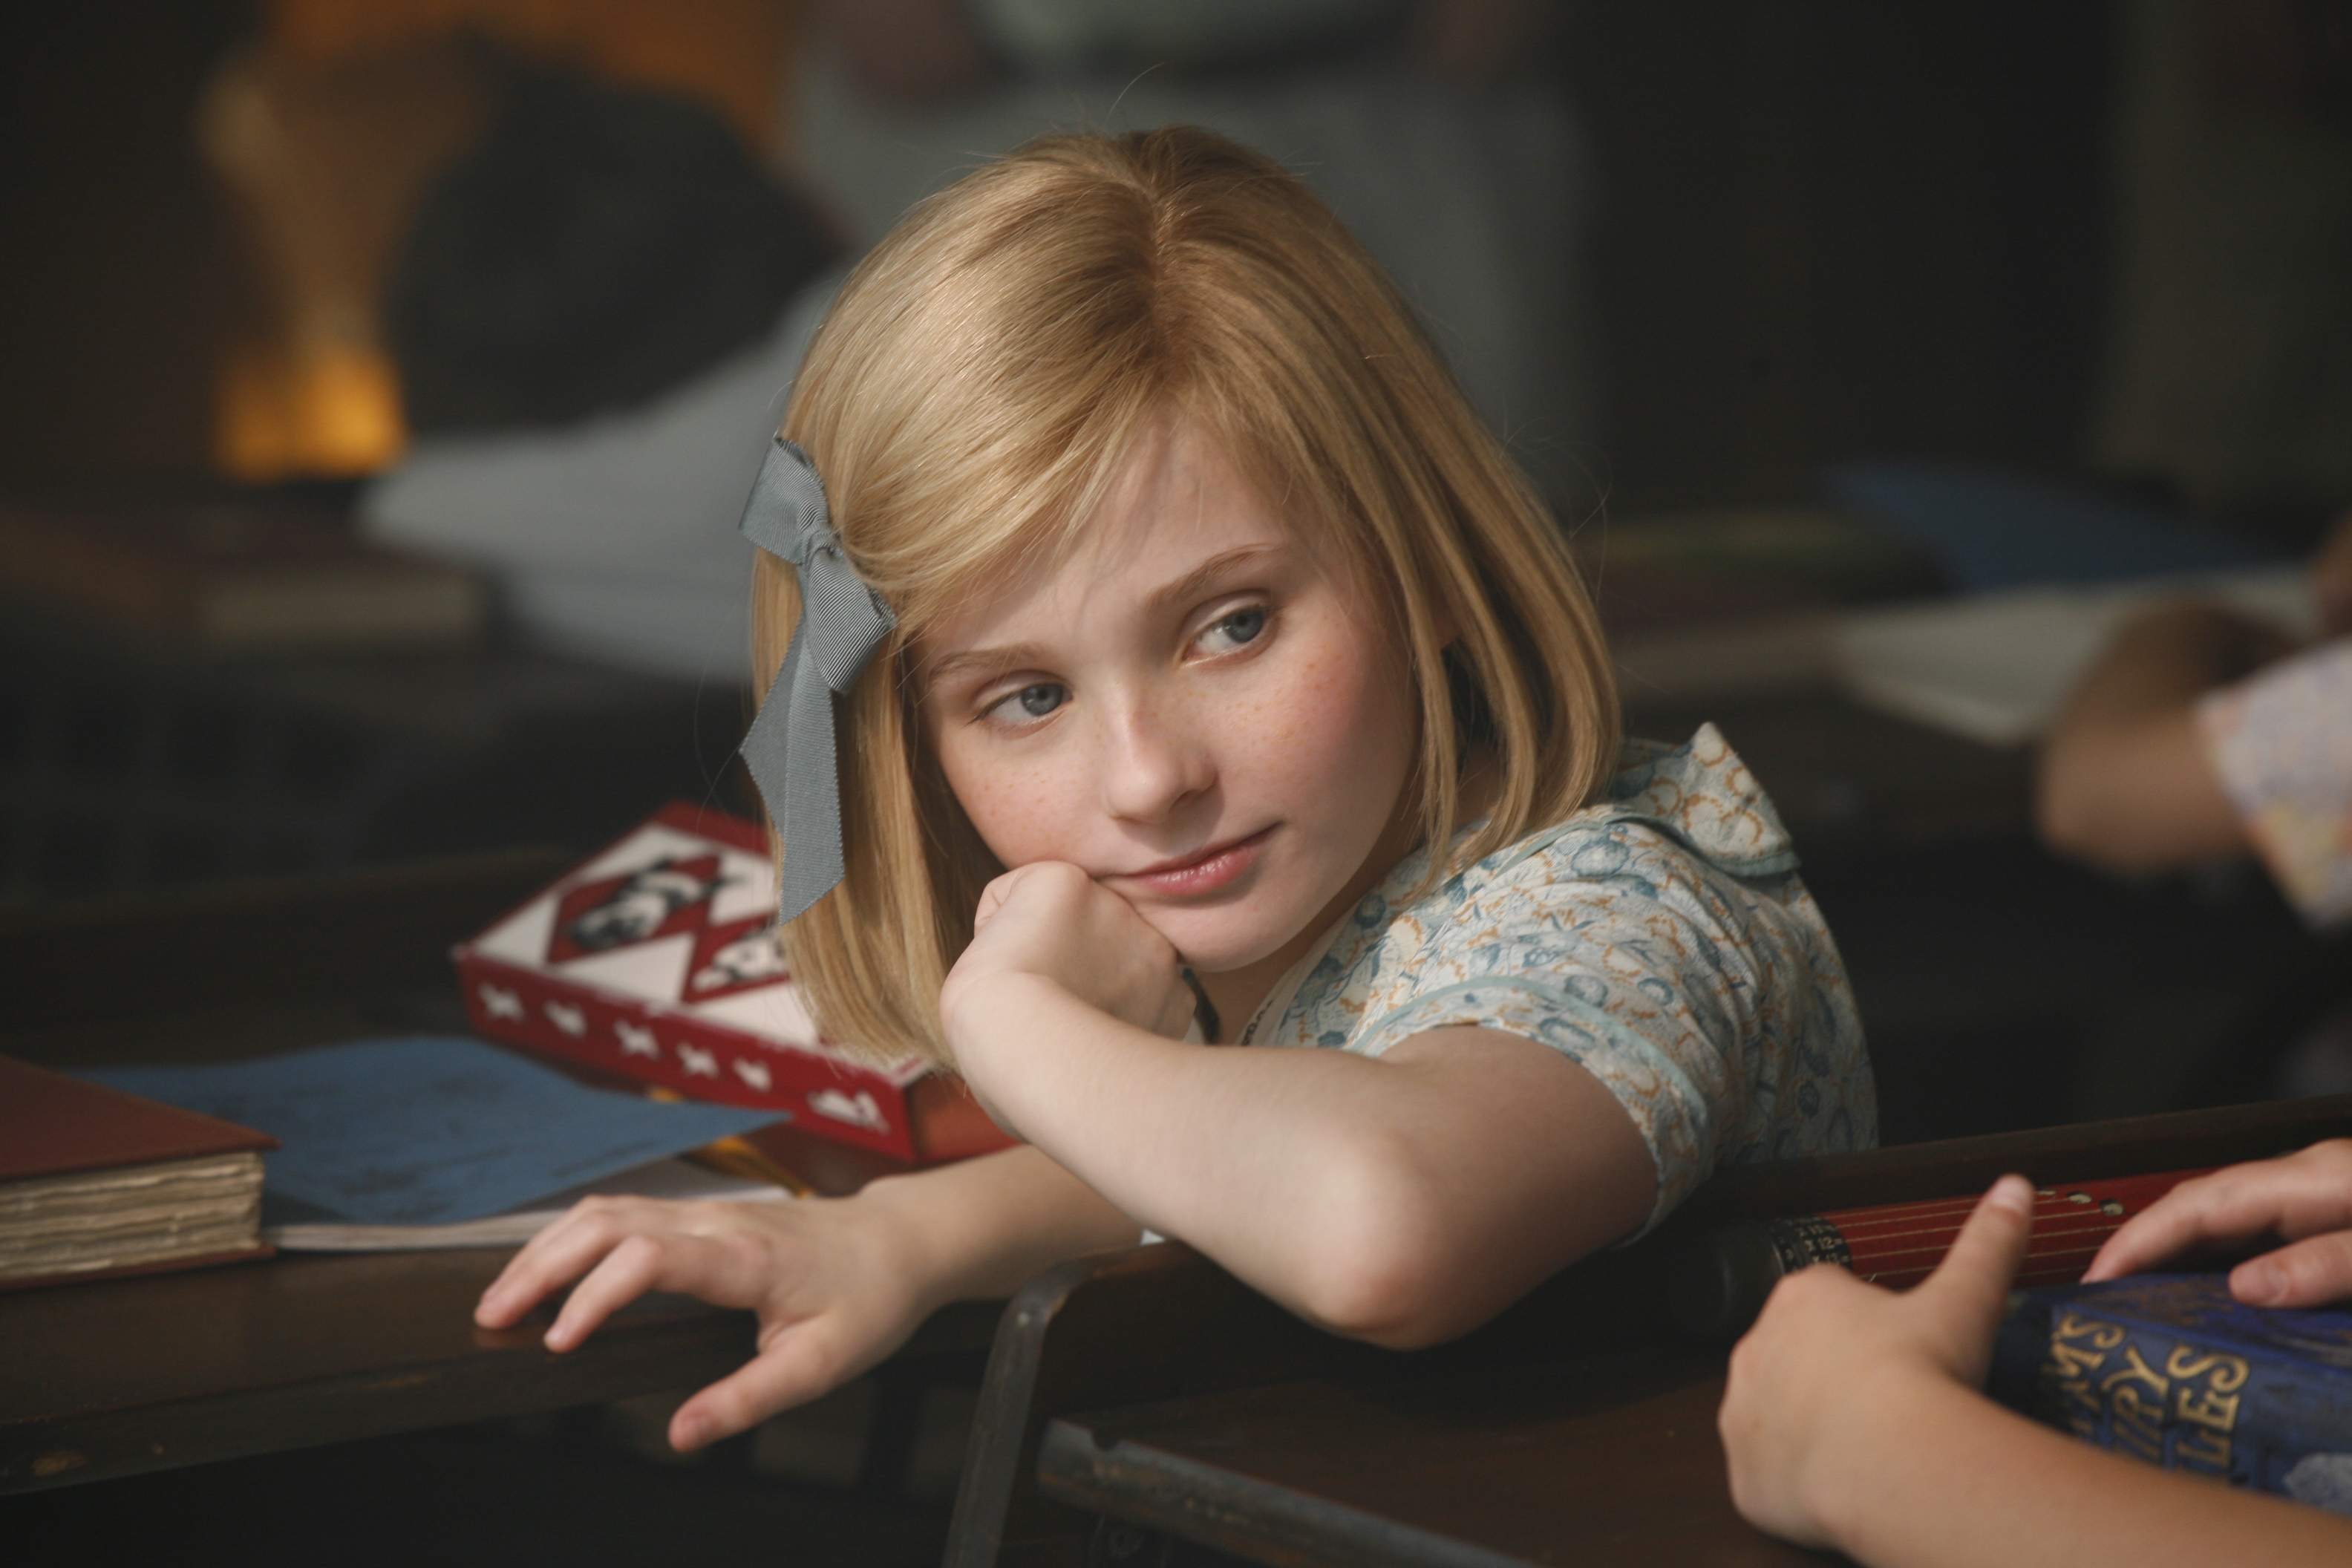 Abigail Breslin in a scene from Kit Kittredge: An American Girl (2008) From HBO Films/A Picturehouse release - Photographer: Cylla von Tiedemann.